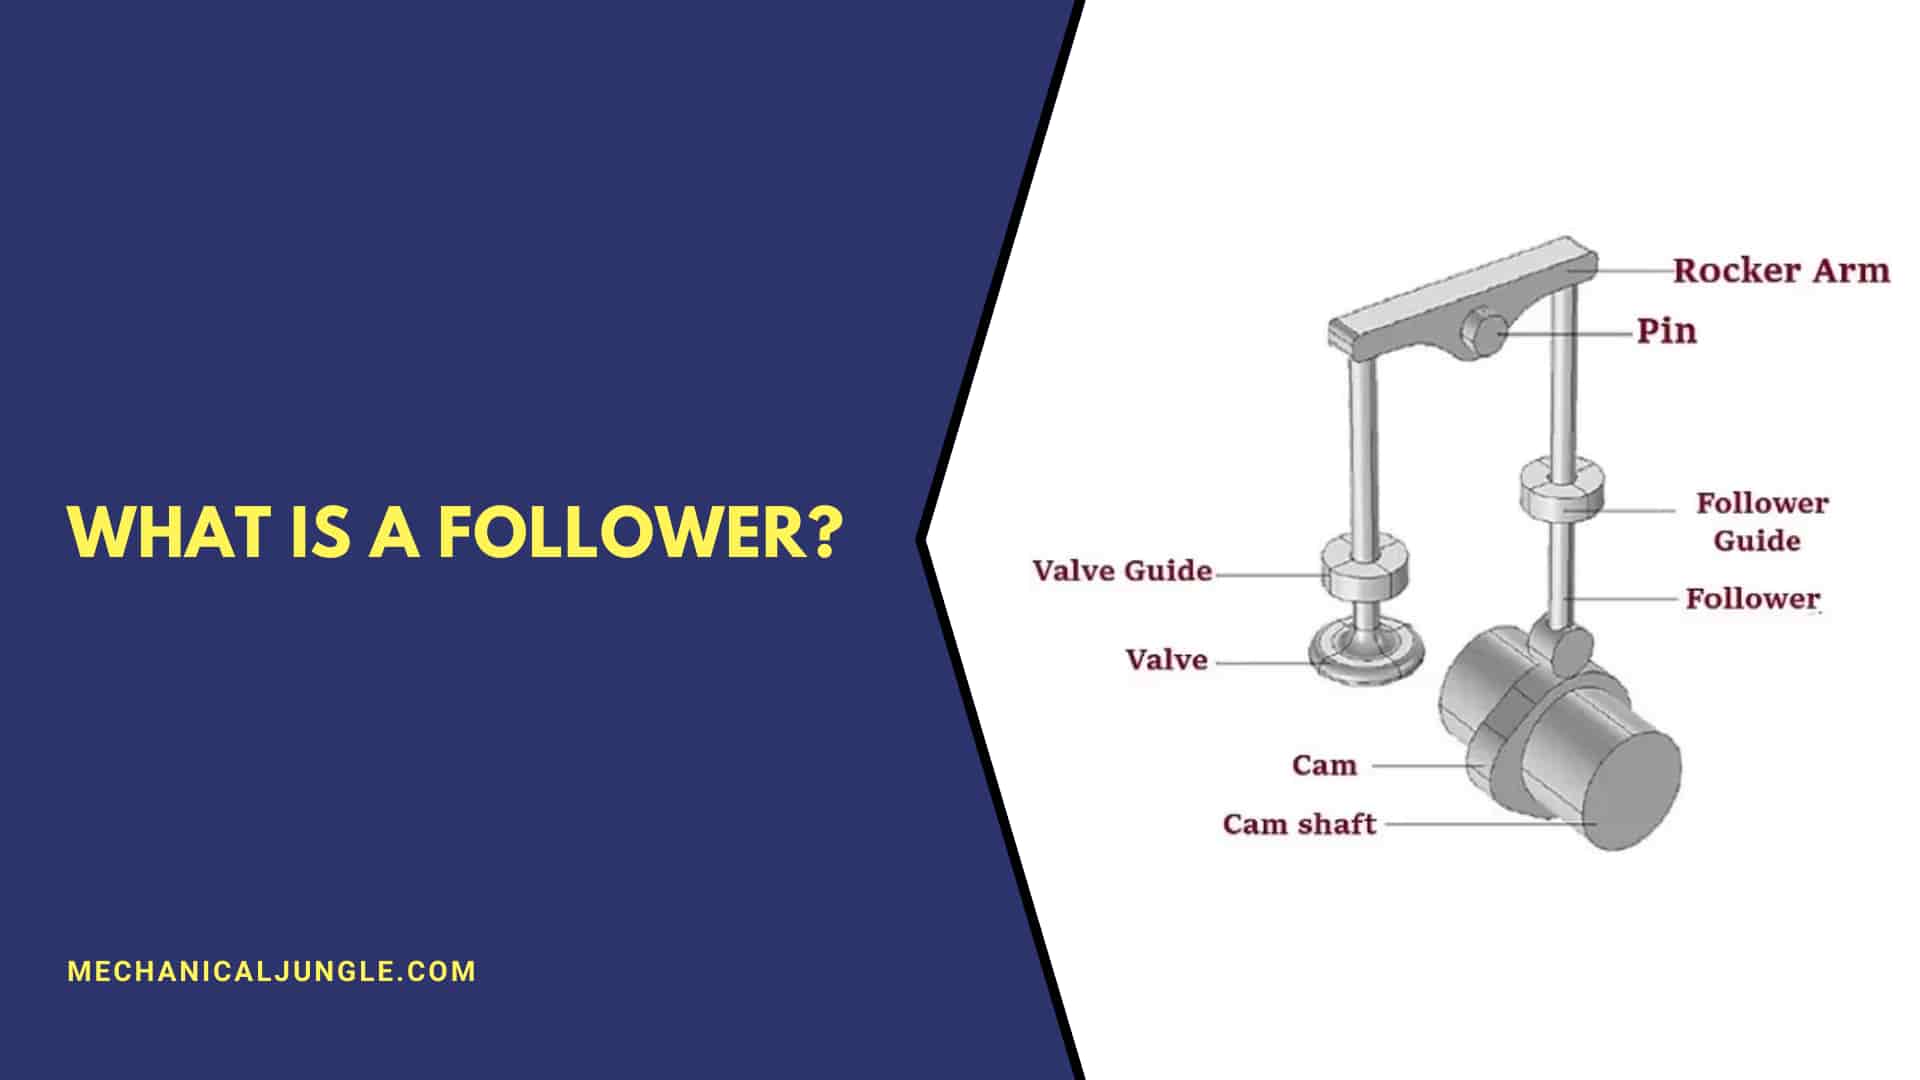 What Is a Follower?